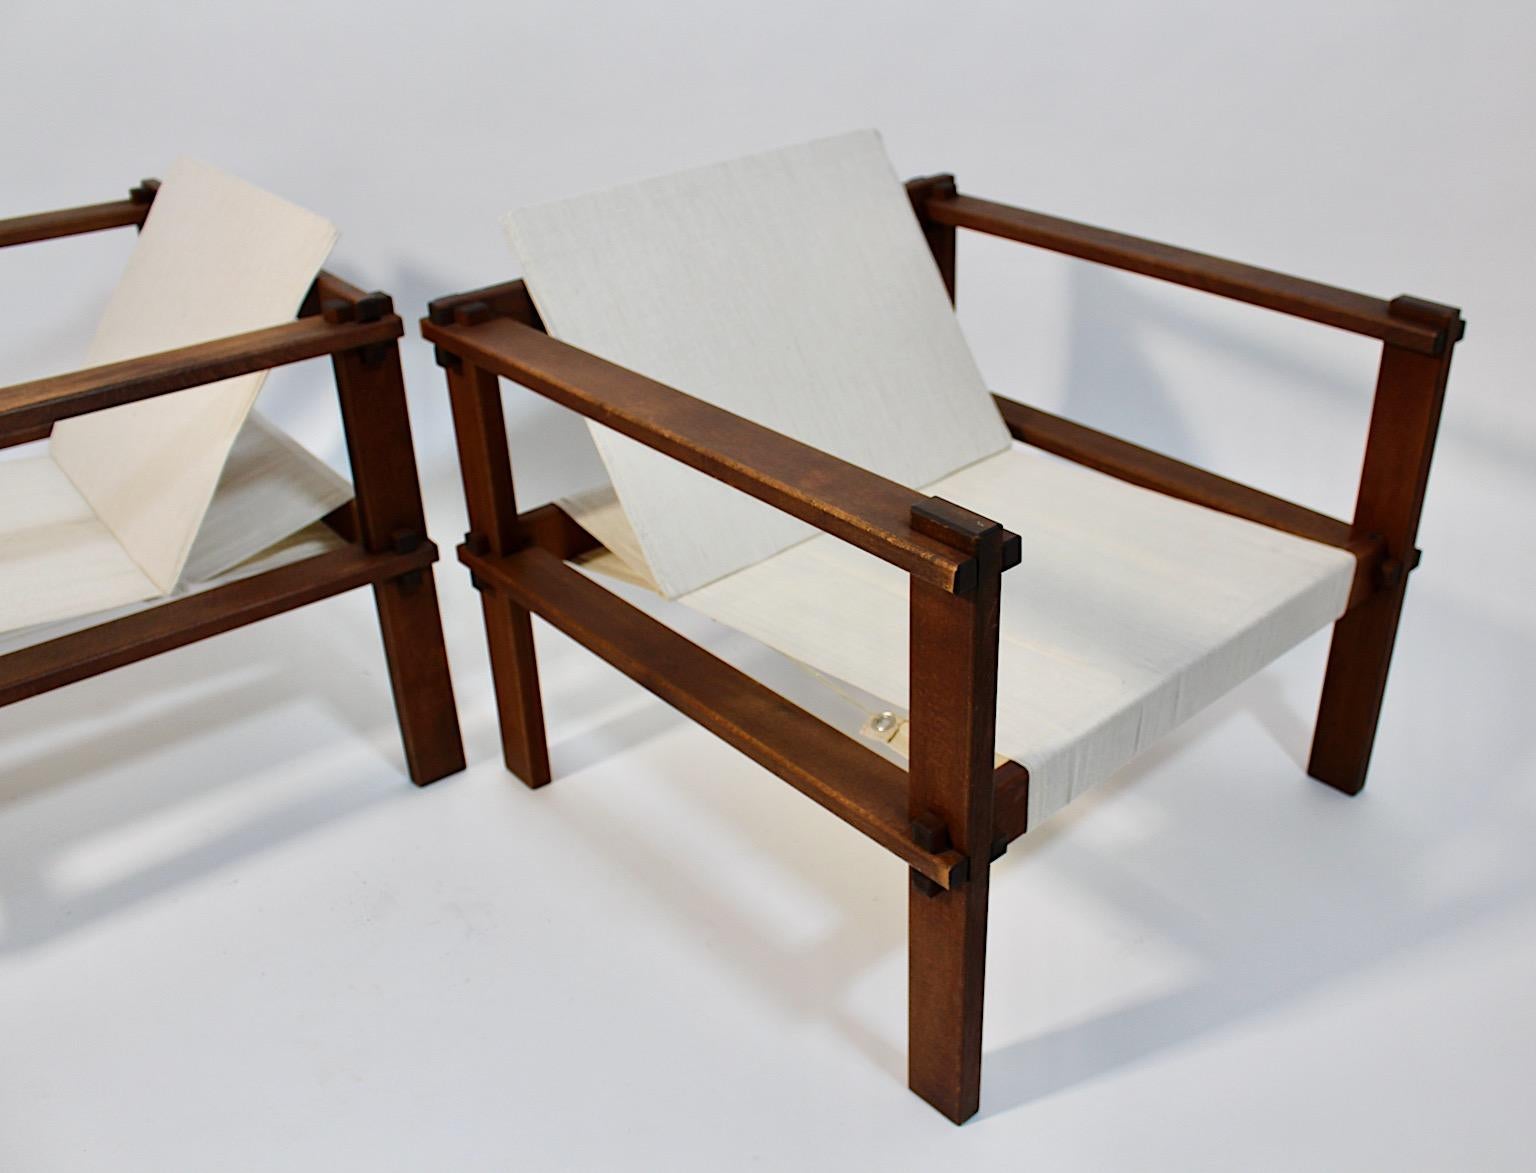 Early 20th Century Bauhaus Pair Duo Beech Canvas Geometric Lounge Chairs 1920s Germany For Sale